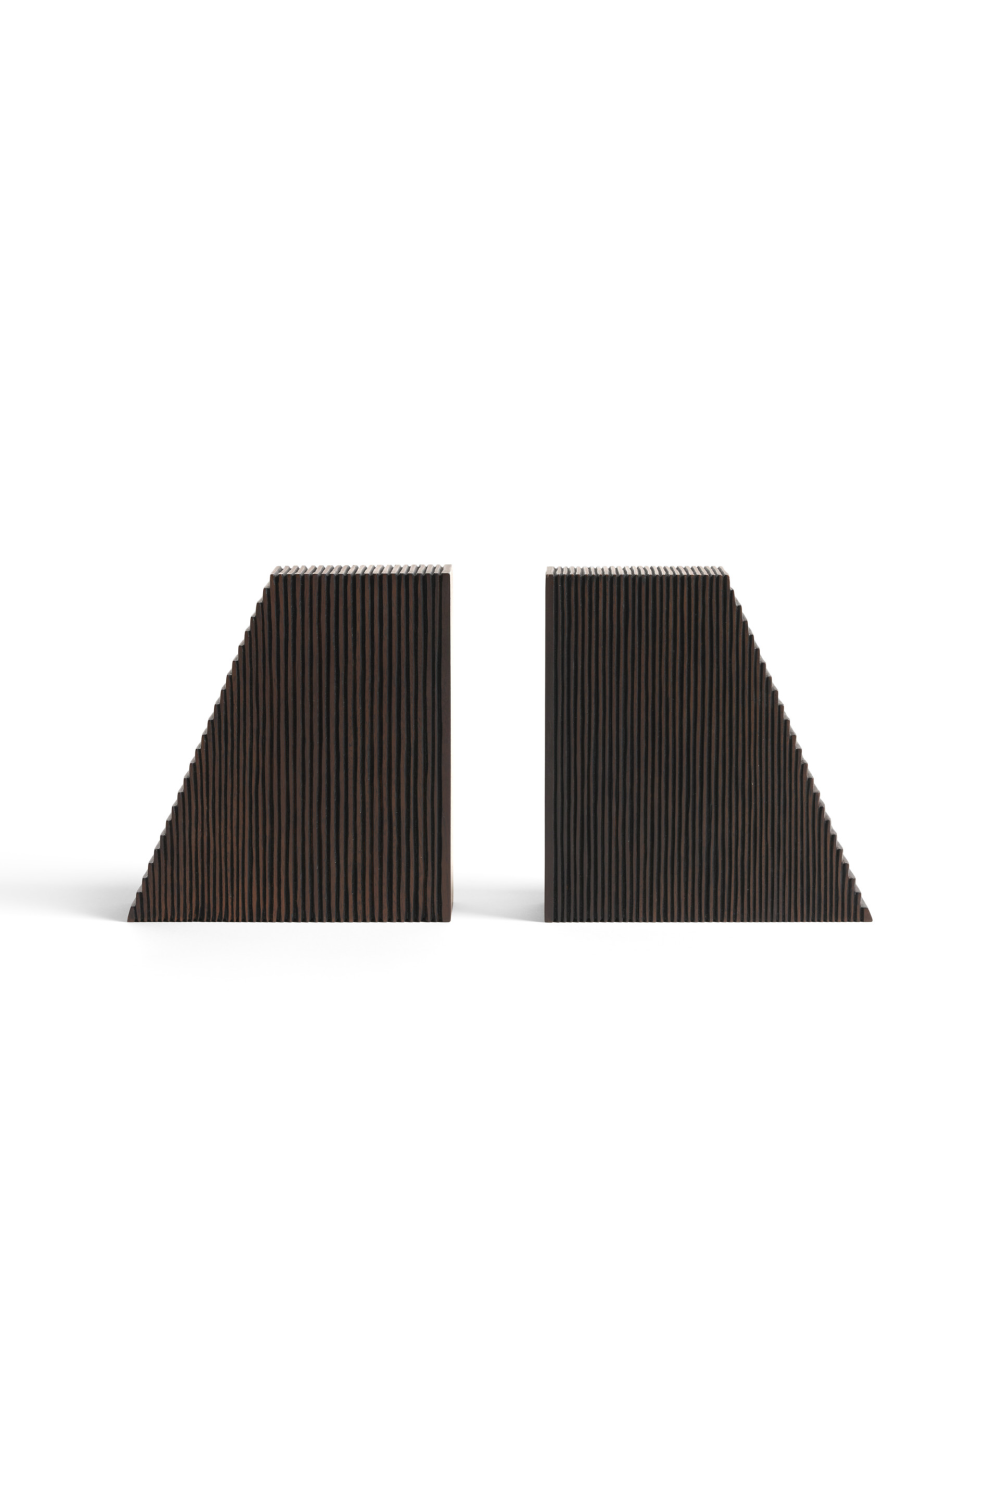 Varnished Mahogany Book Ends (2) | Ethnicraft Grooves | OROA.COM